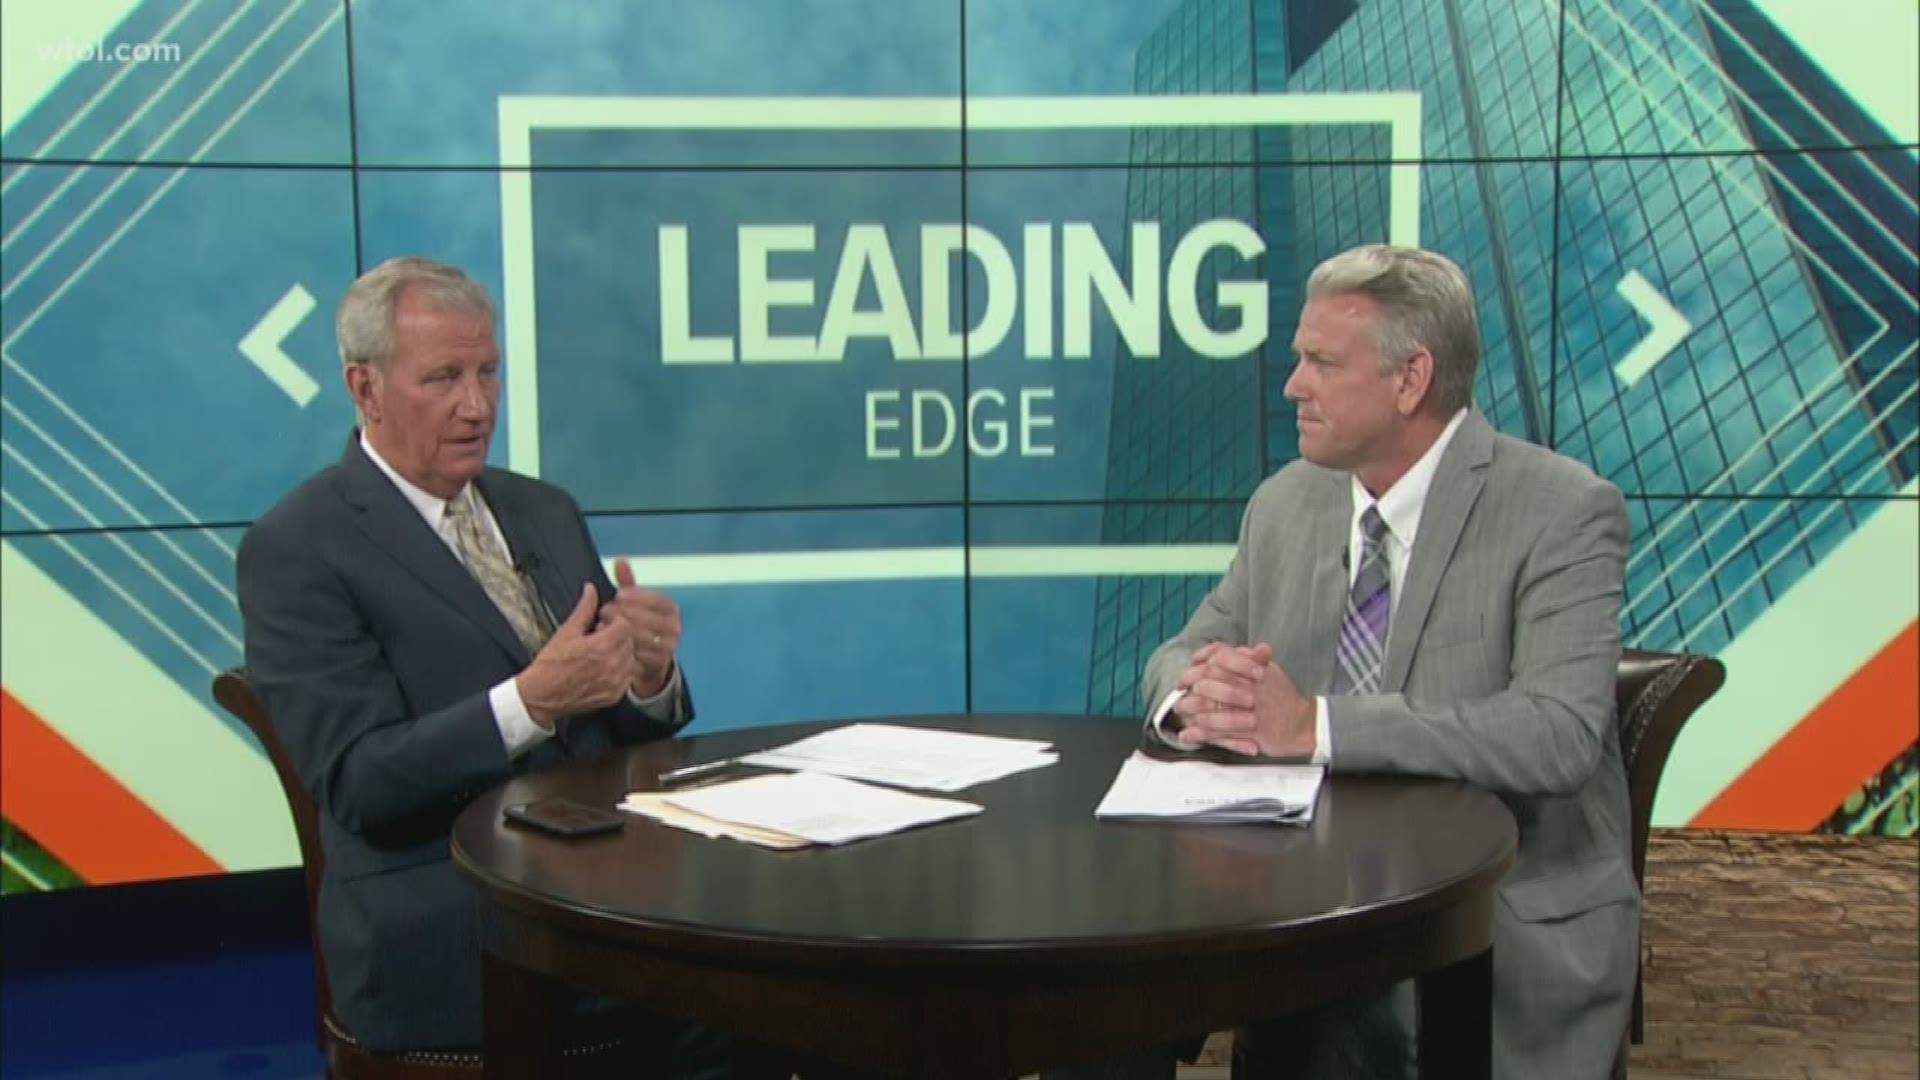 Perrysburg Superintendent Tom Hosler joins Jerry Anderson at the Leading Edge table.